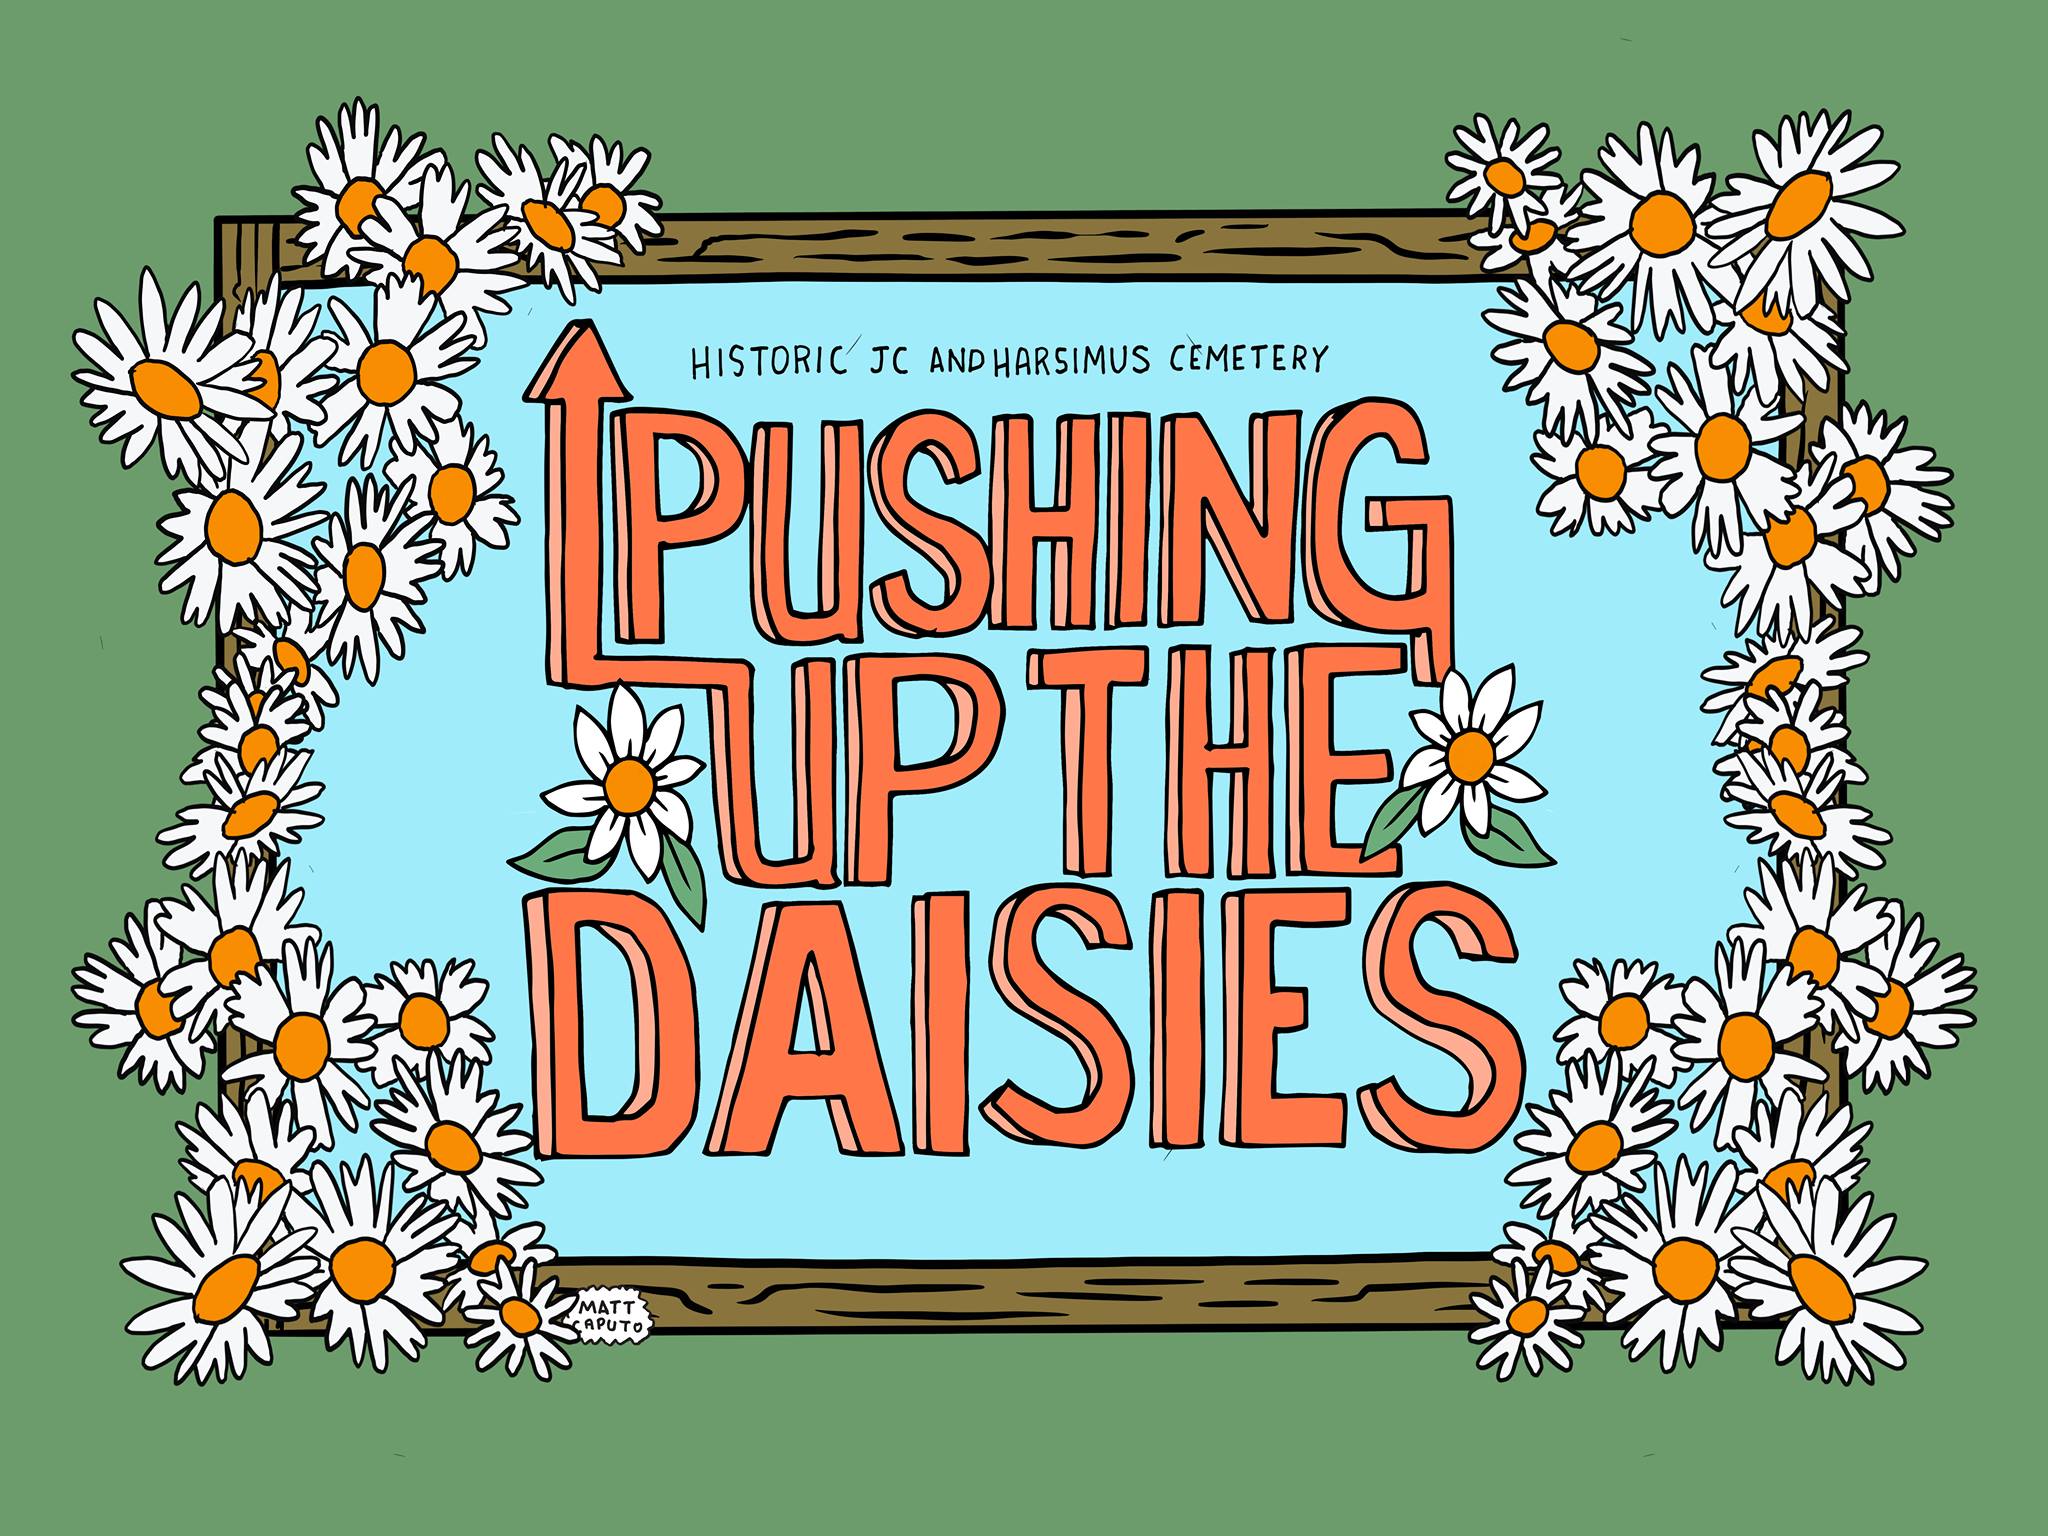 Pushing up the Daisies Festival 2021